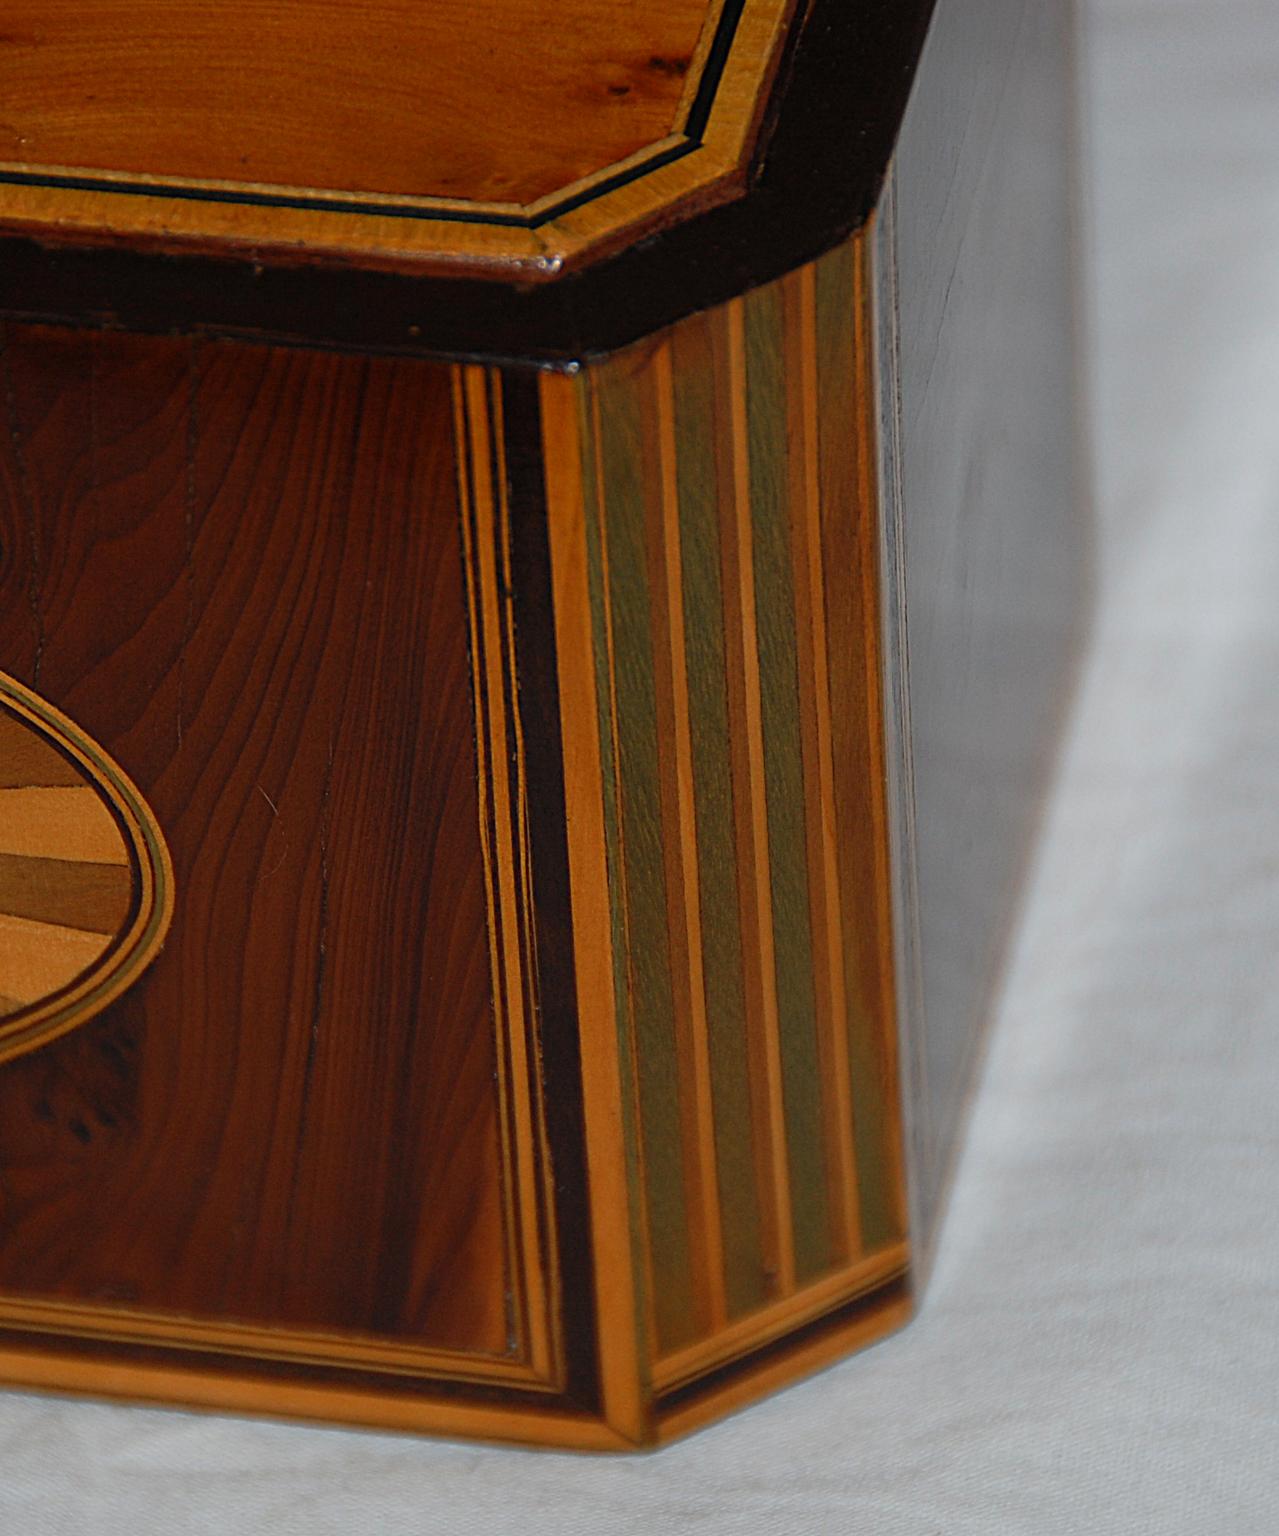 English Georgian Period Yew Wood Octagonal Tea Caddy with Fan and Column Inlays For Sale 1